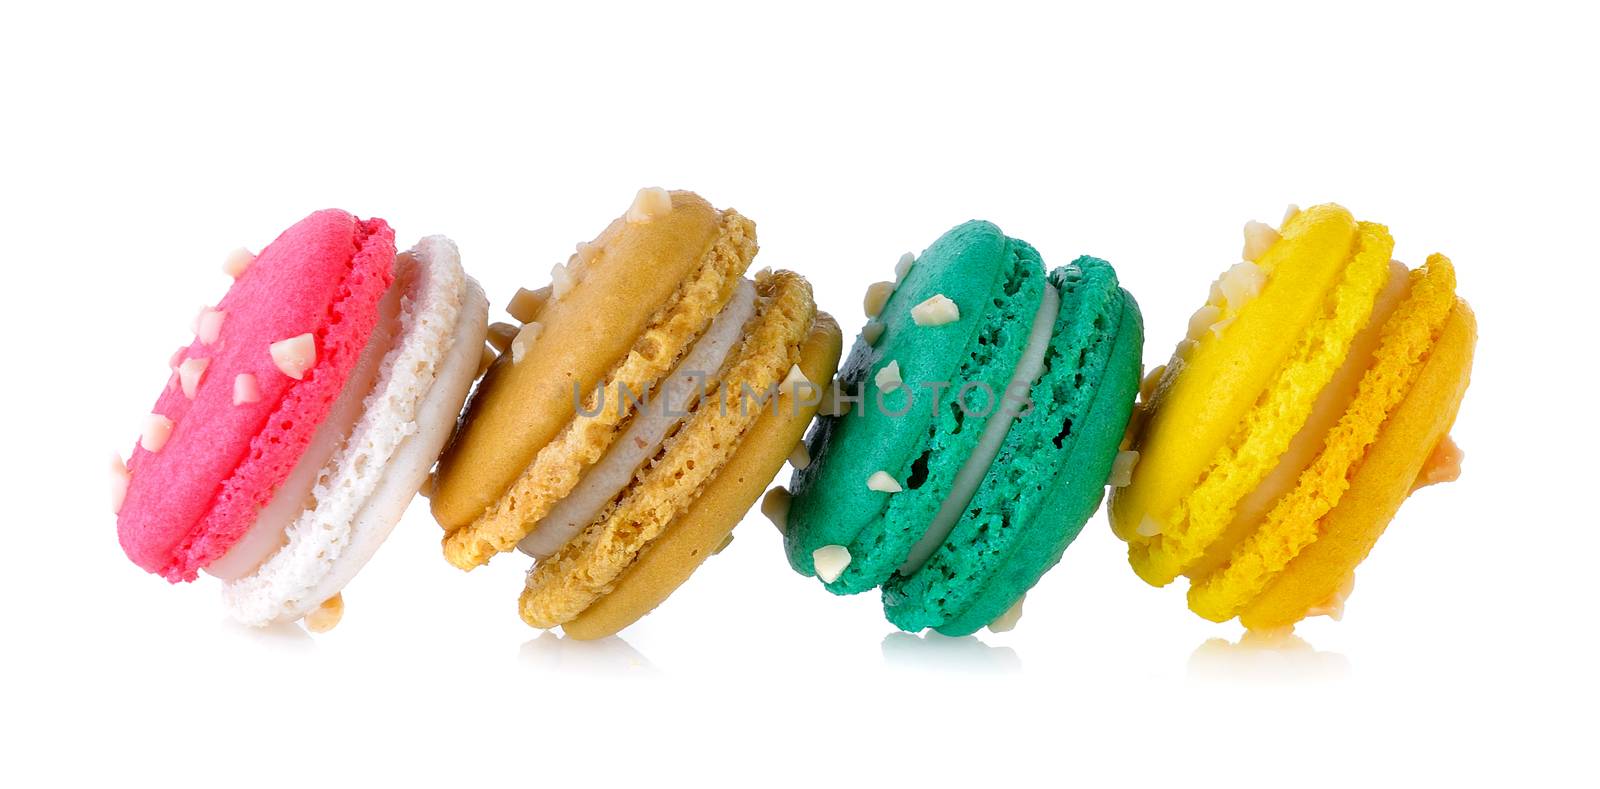  macaroons on white background by sommai